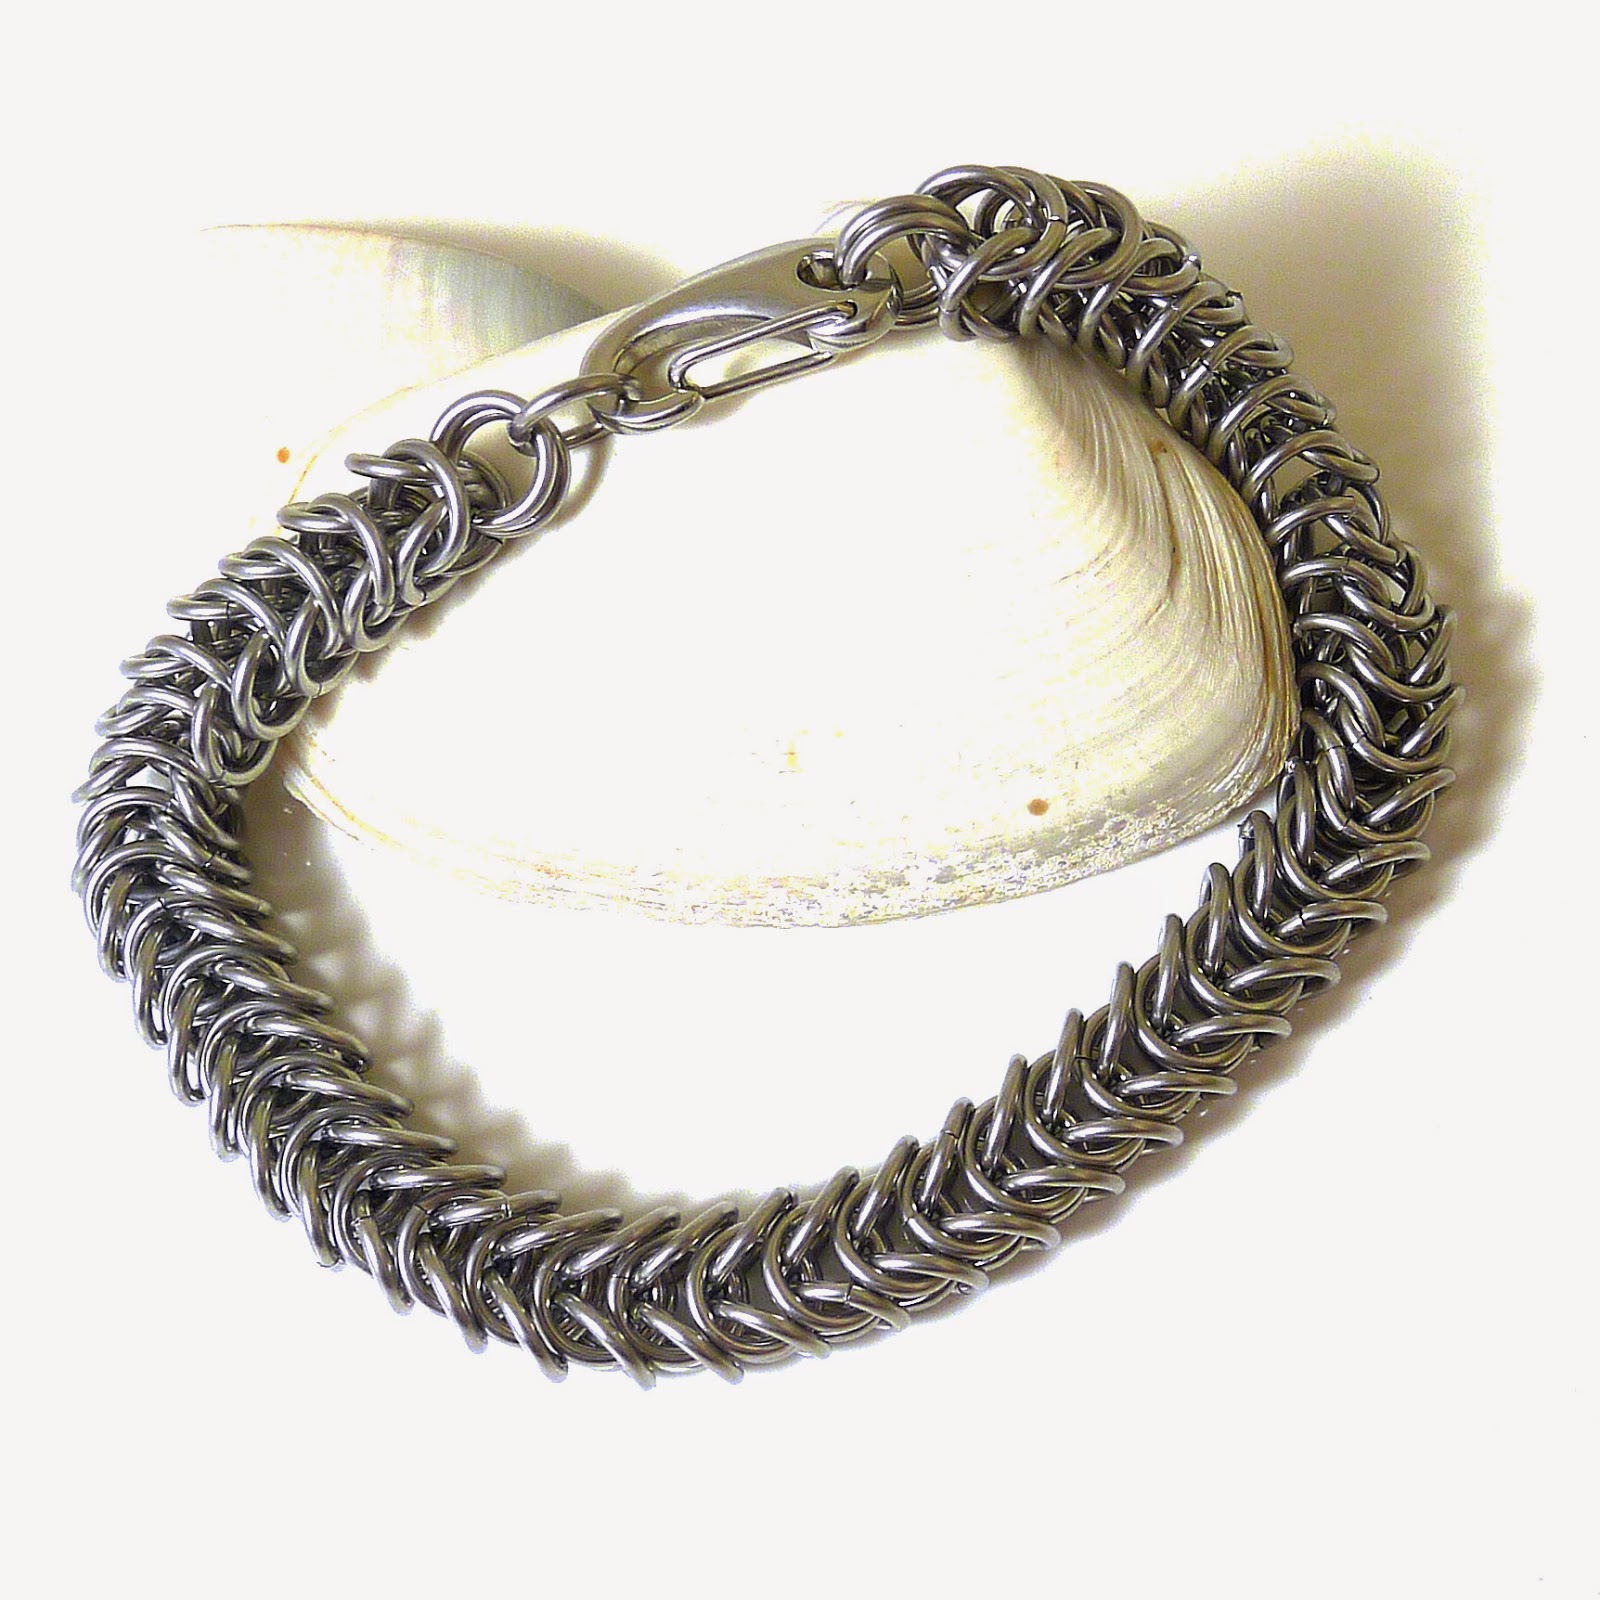 http://www.shazzabethcreations.co.nz/#!product/prd1/2560146991/men%27s-stainless-steel-box-chainmaille-bracelet